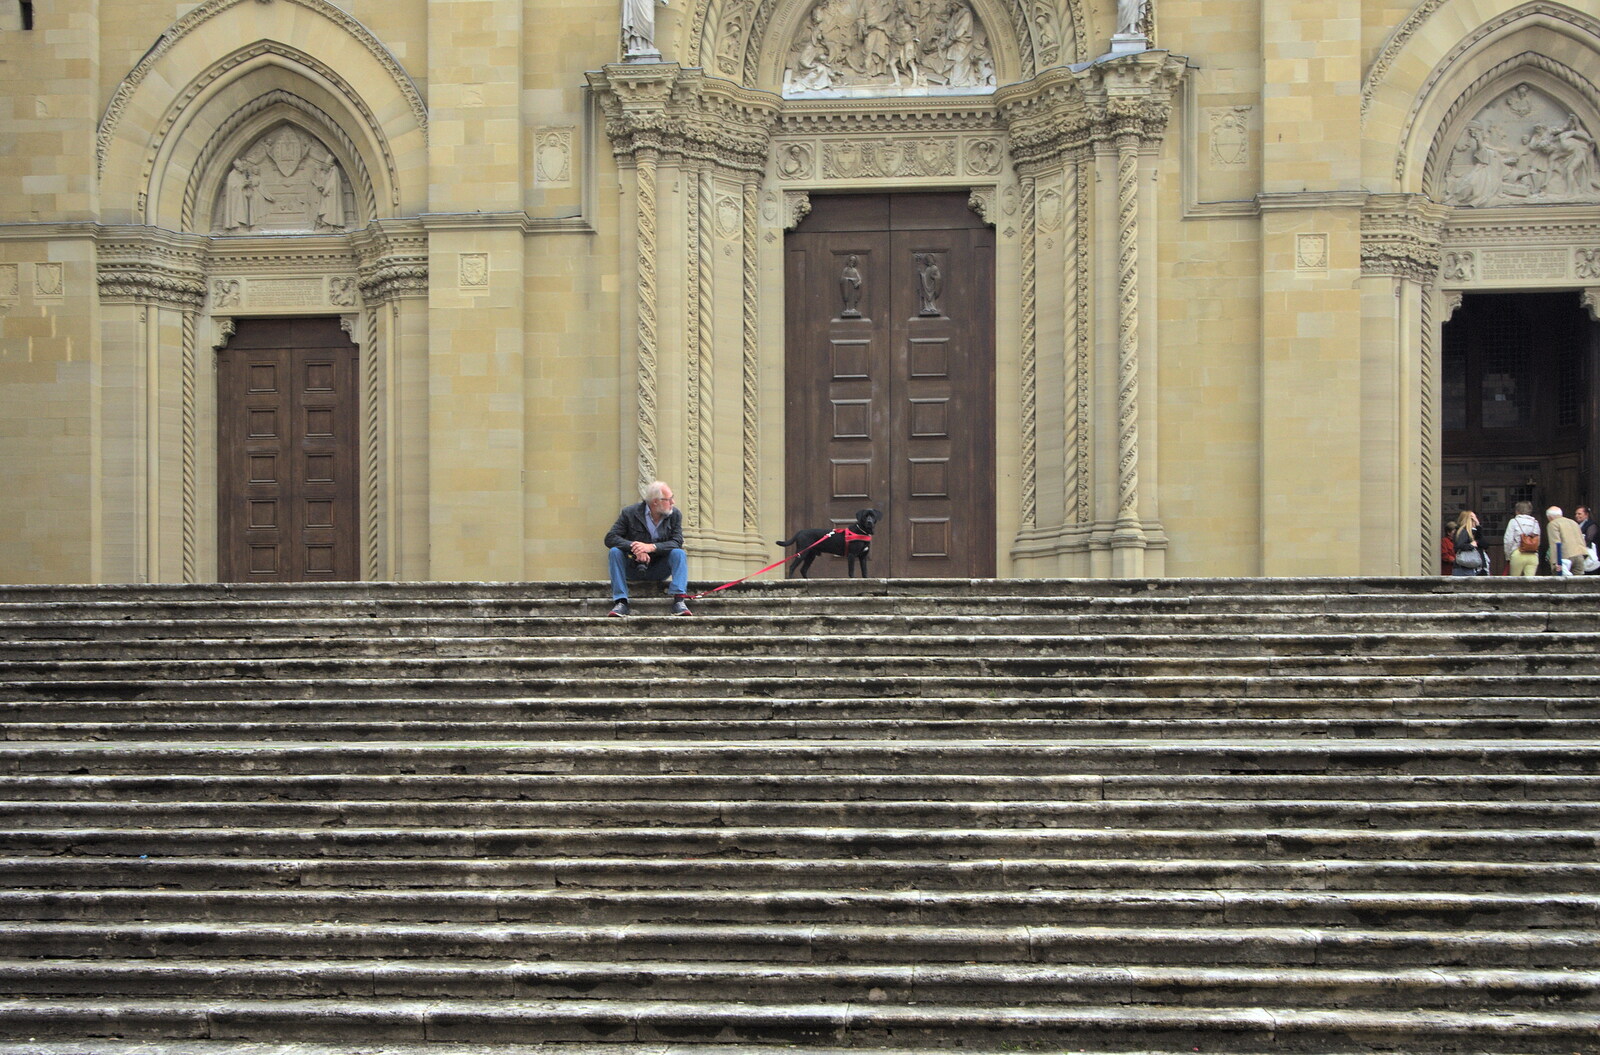 Marconi, Arezzo and the Sagra del Maccherone Festival, Battifolle, Tuscany - 9th June 2013: Old man on the cathedral steps